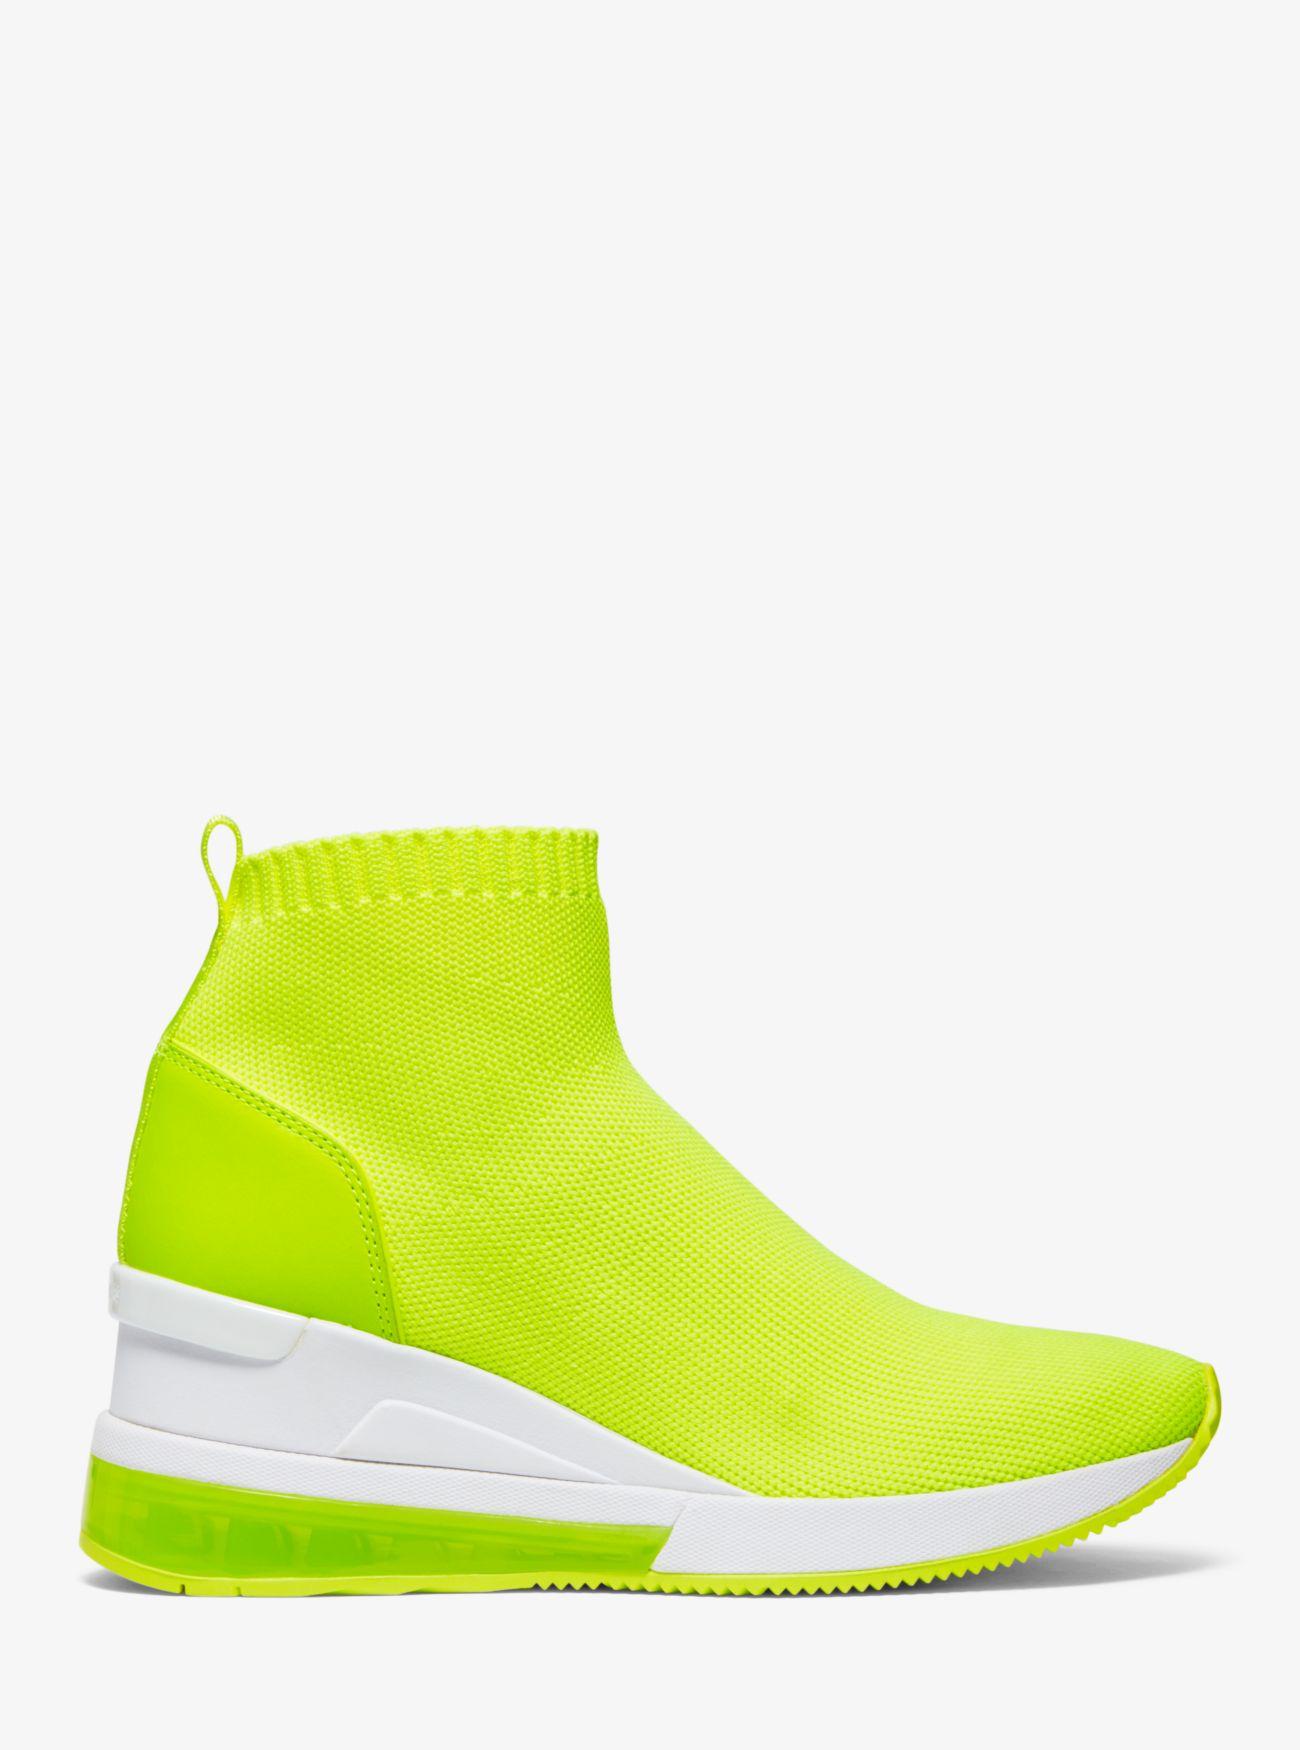 Michael Kors Skyler Extreme Neon Stretch-knit Sock Sneaker in Neon Yellow  (Yellow) | Lyst